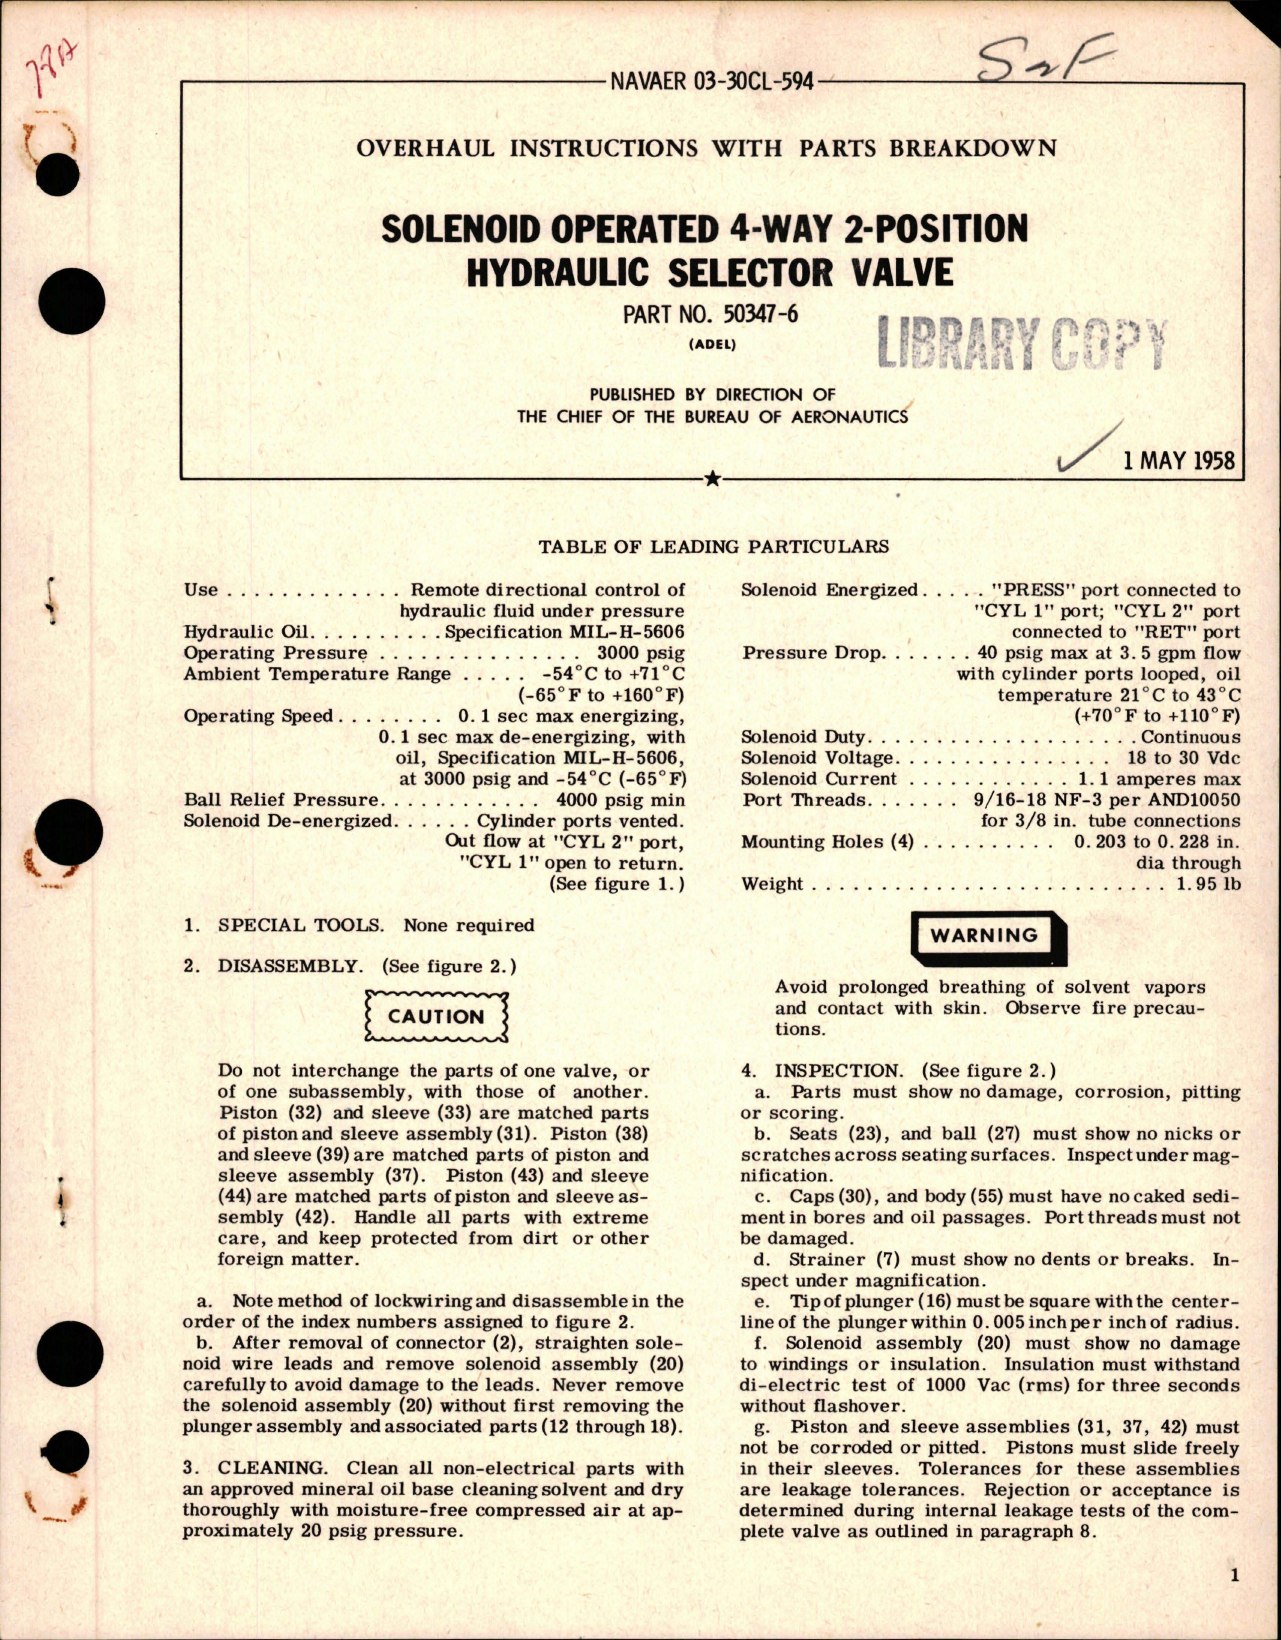 Sample page 1 from AirCorps Library document: Overhaul Instructions with Parts for Solenoid Operated 4-Way 2-Position Hydraulic Selector Valve - Part 50347-6